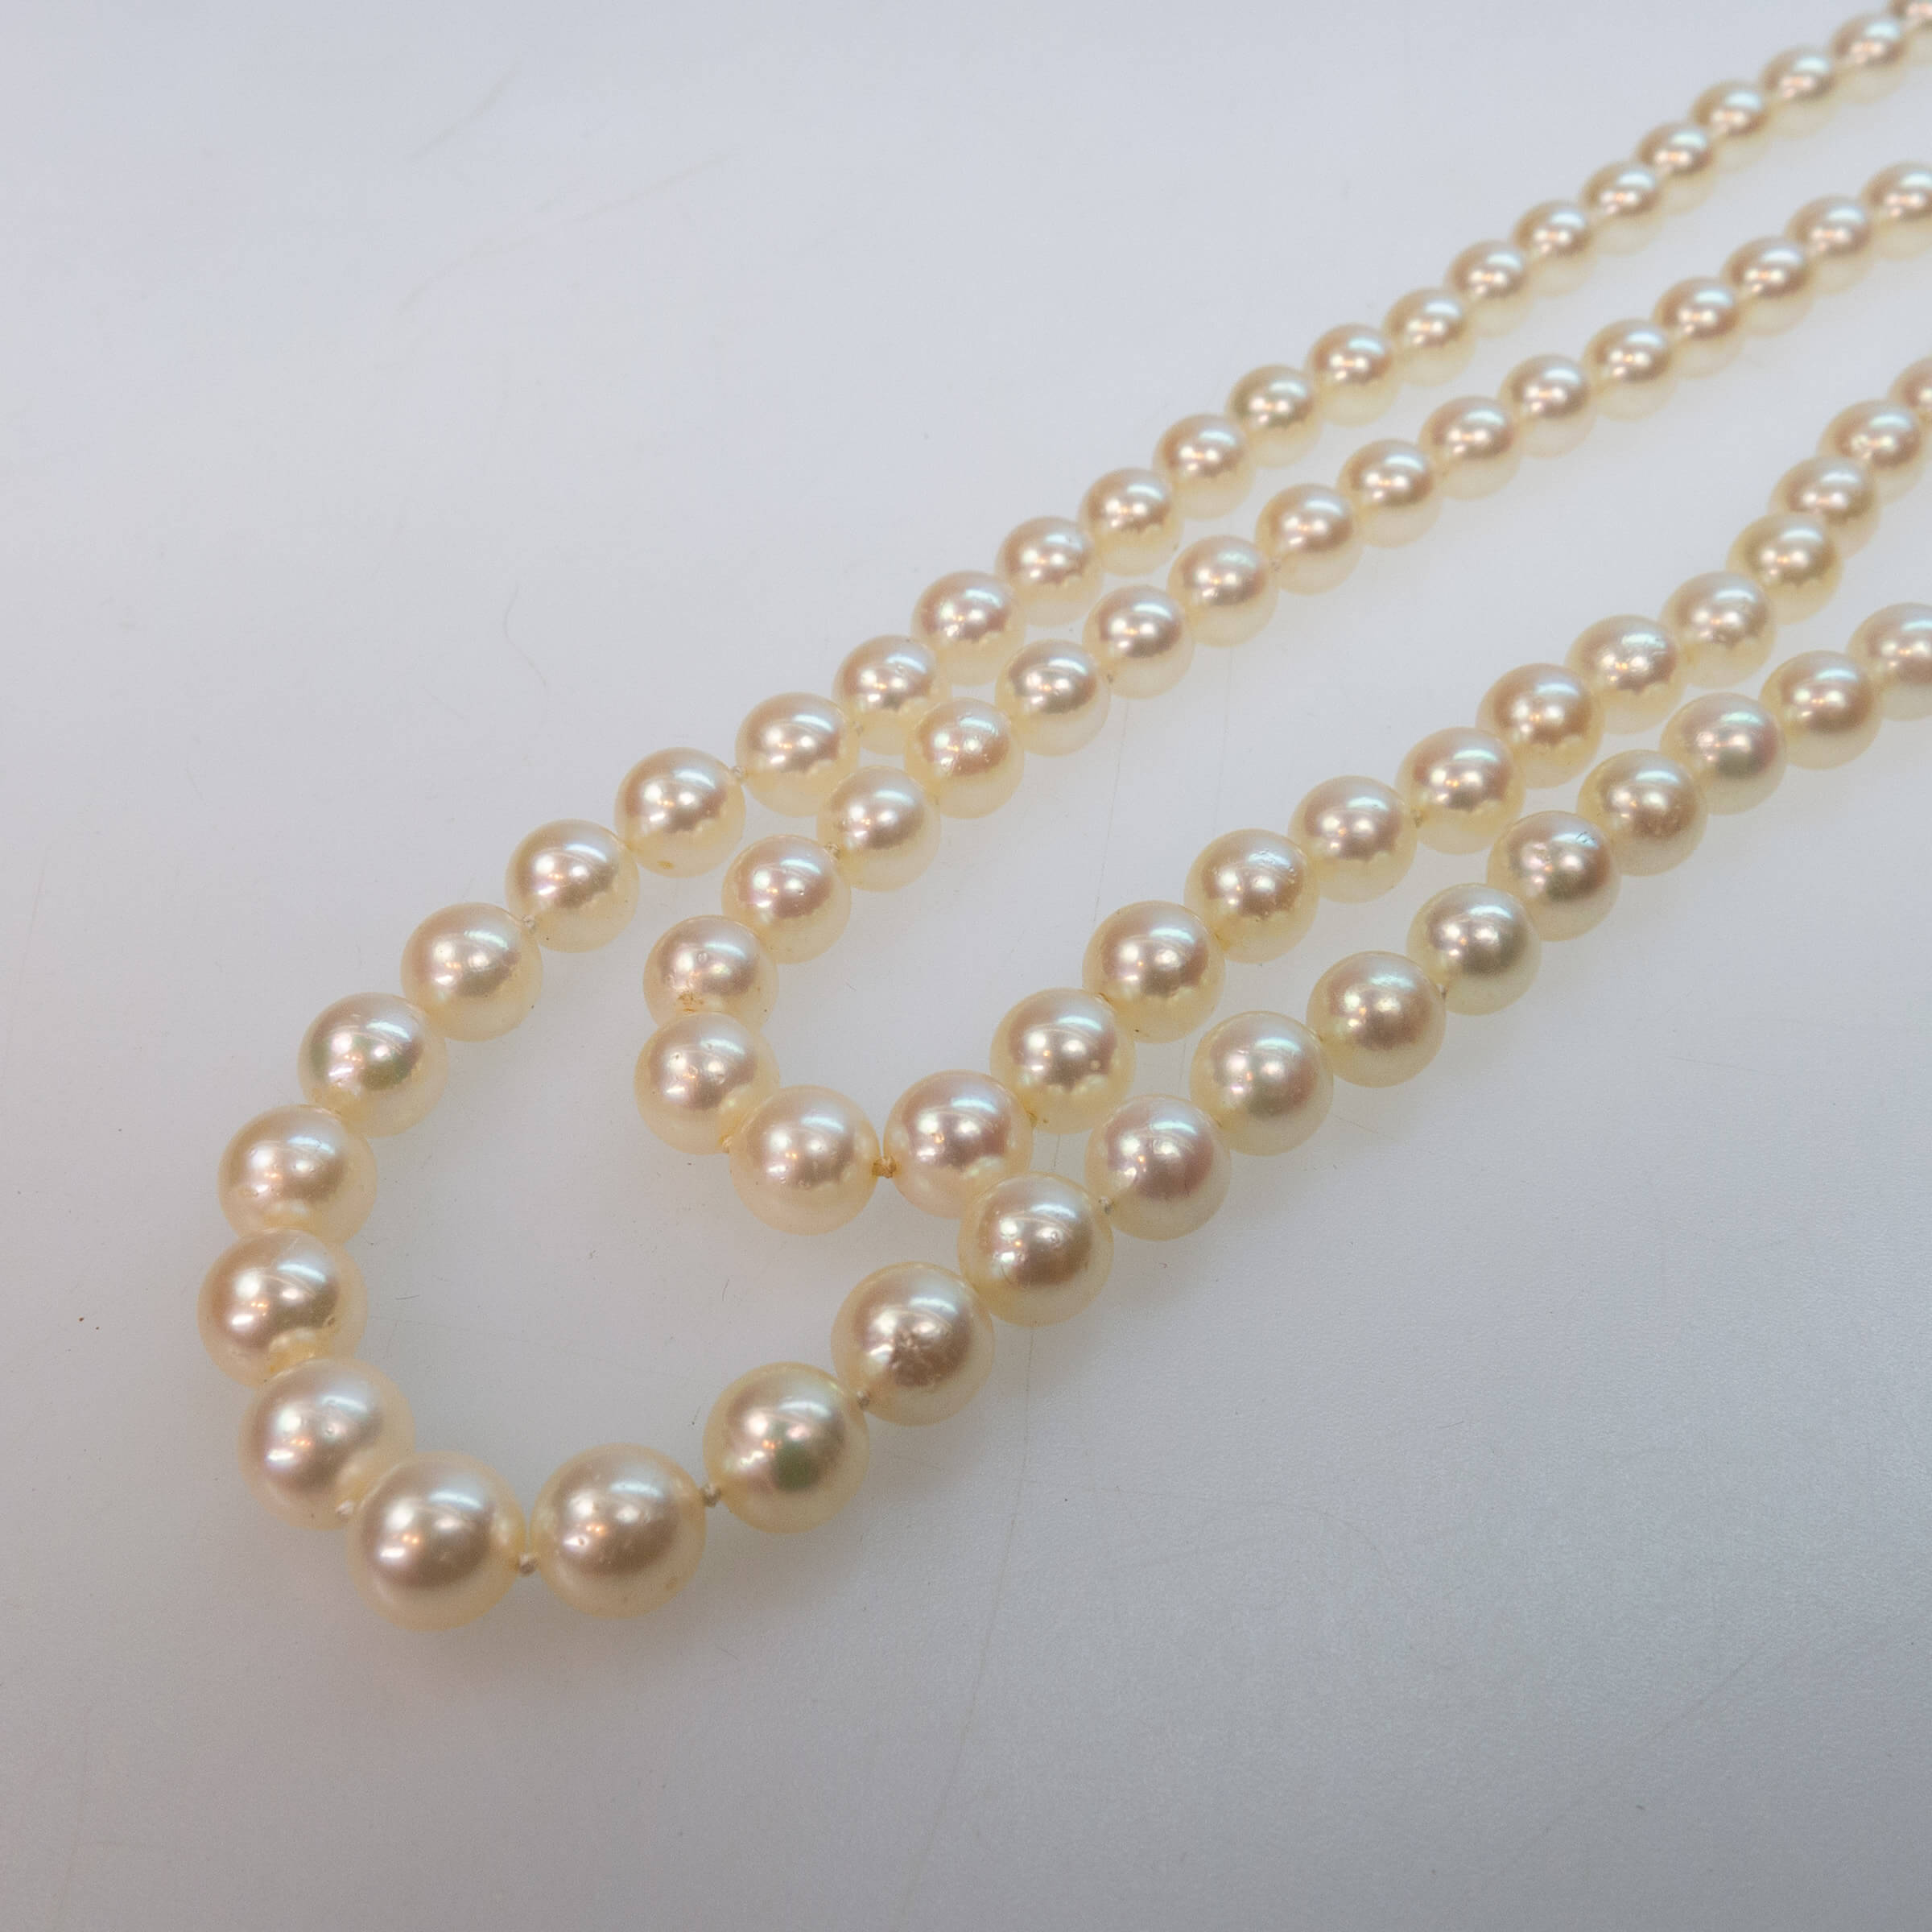 Endless Strand Of Cultured Pearls